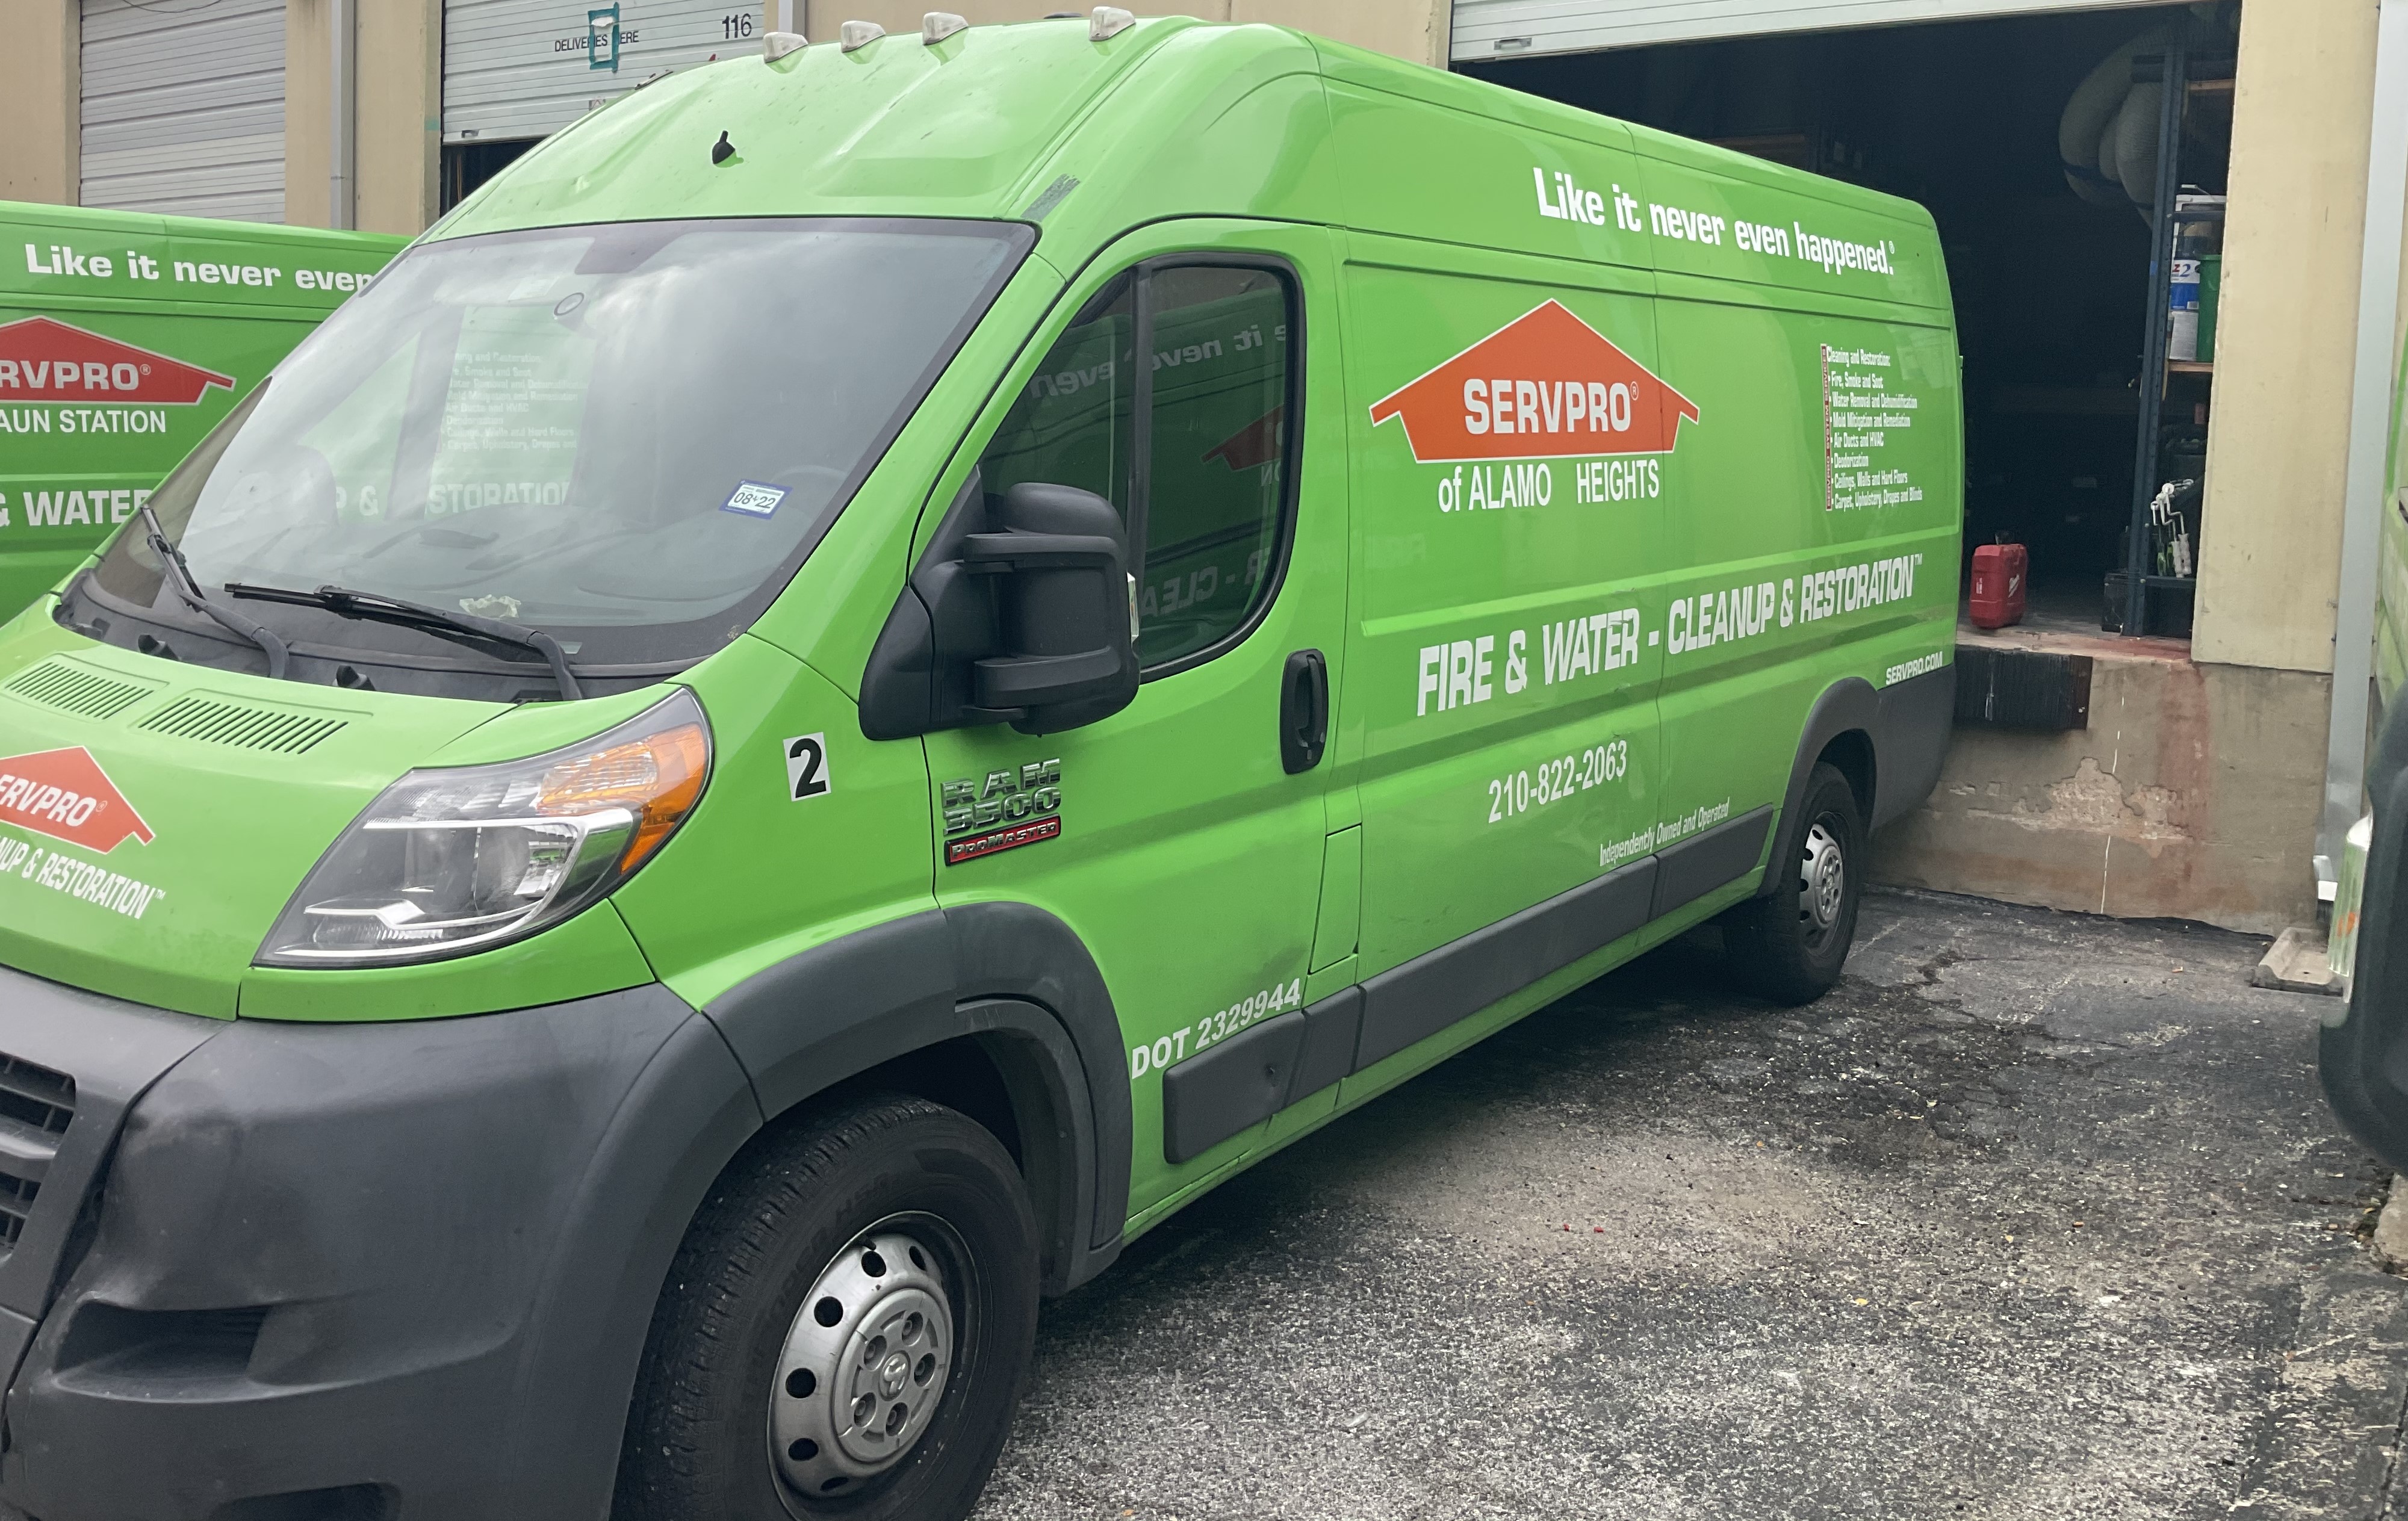 This is one of SERVPRO of Alamo Heights Vans loading up equipment at the warehouse doc.